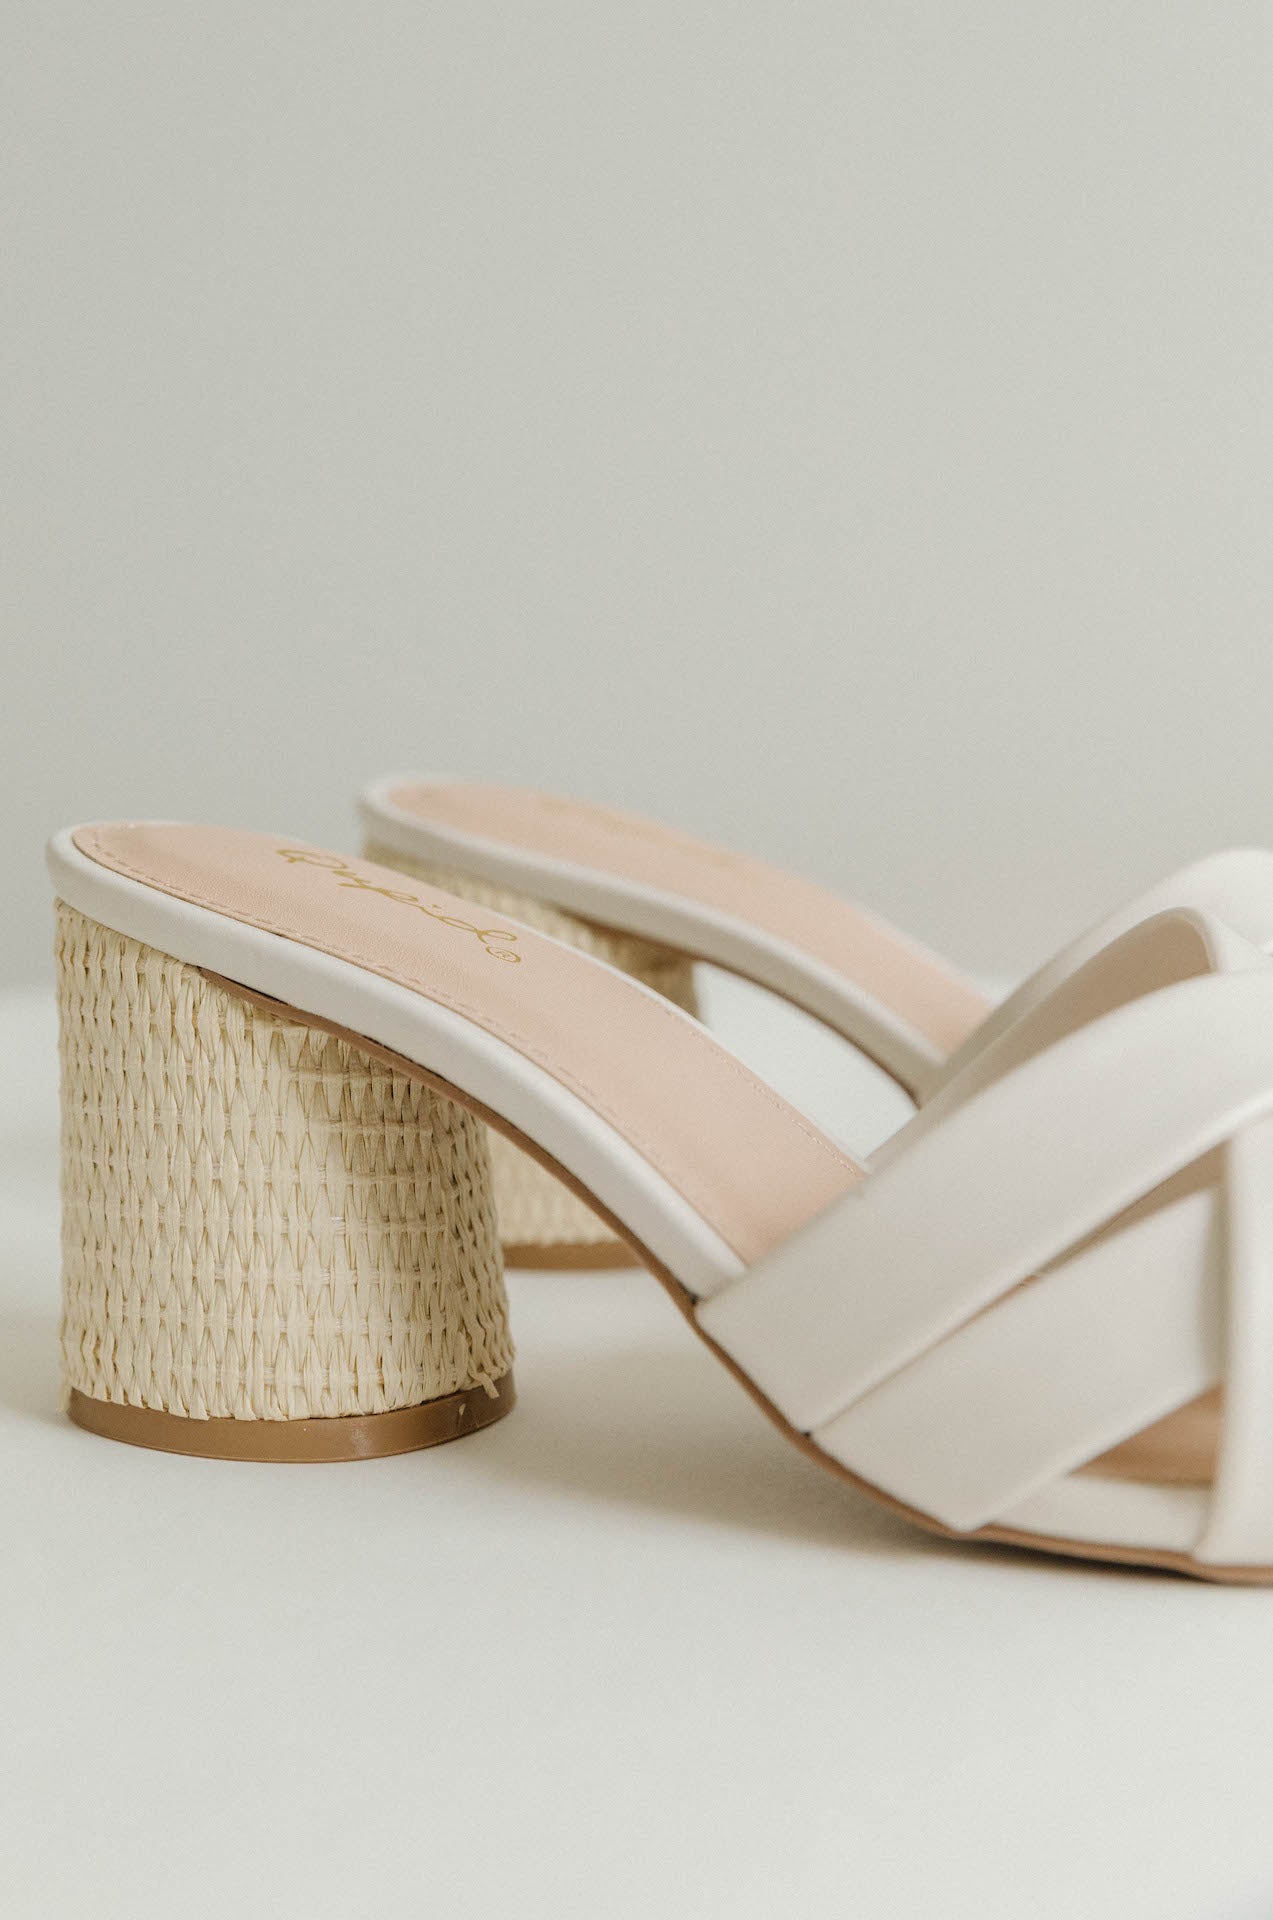 basket weave heels with a white criss cross design